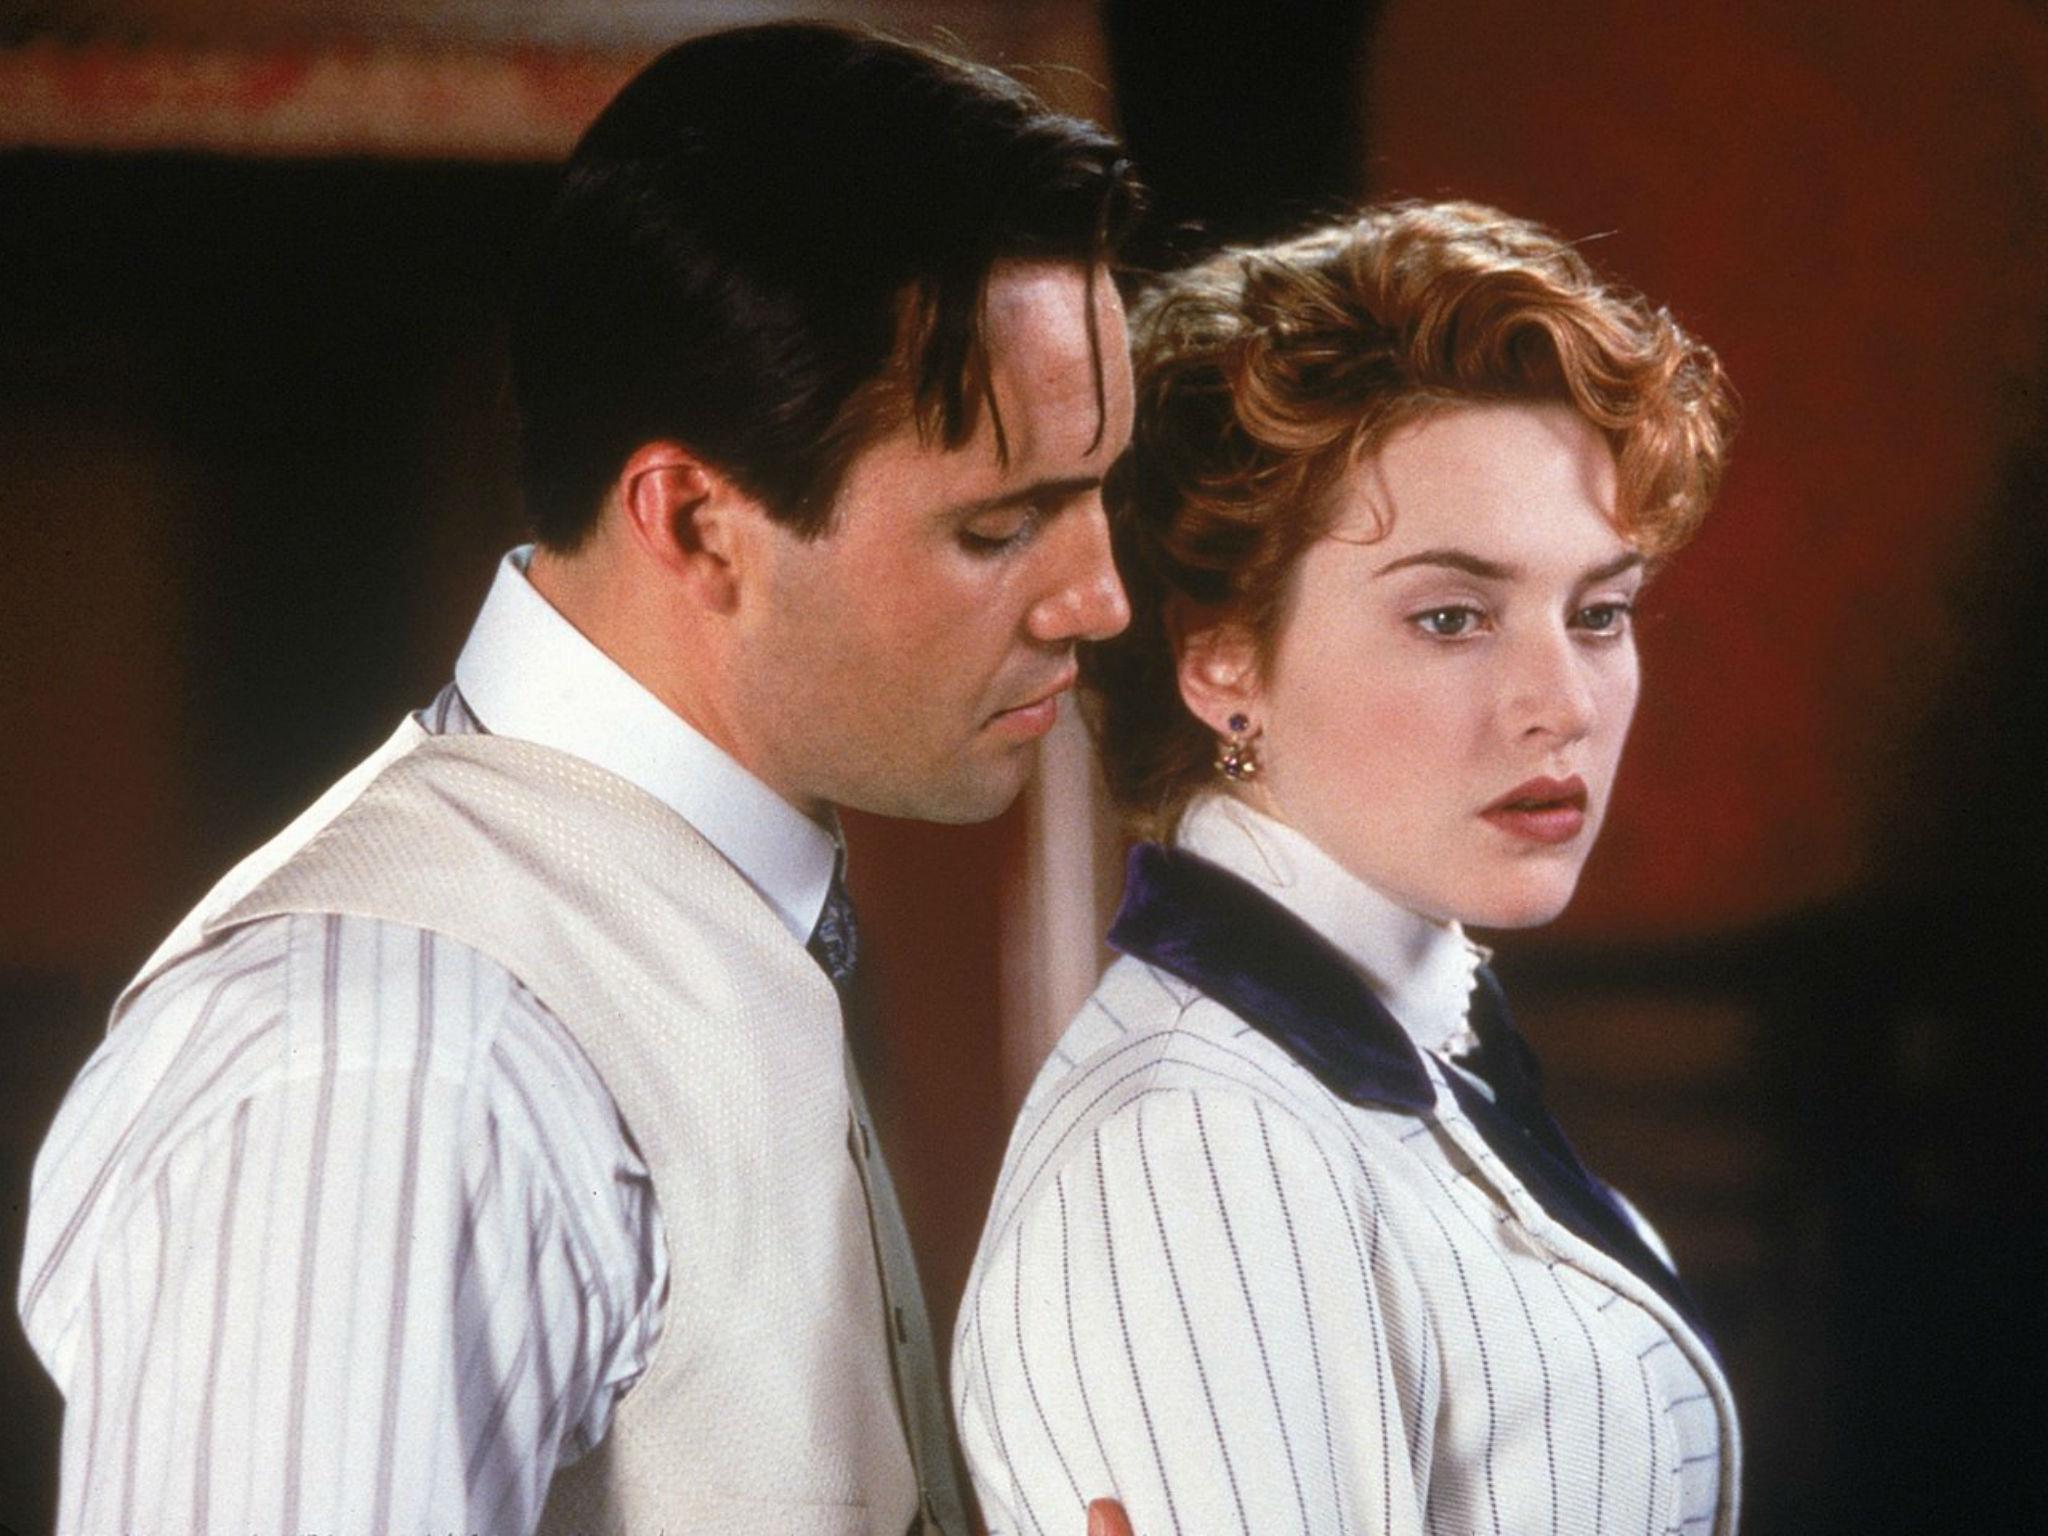 Billy Zane and Kate Winslet as Cal and Rose in Titanic